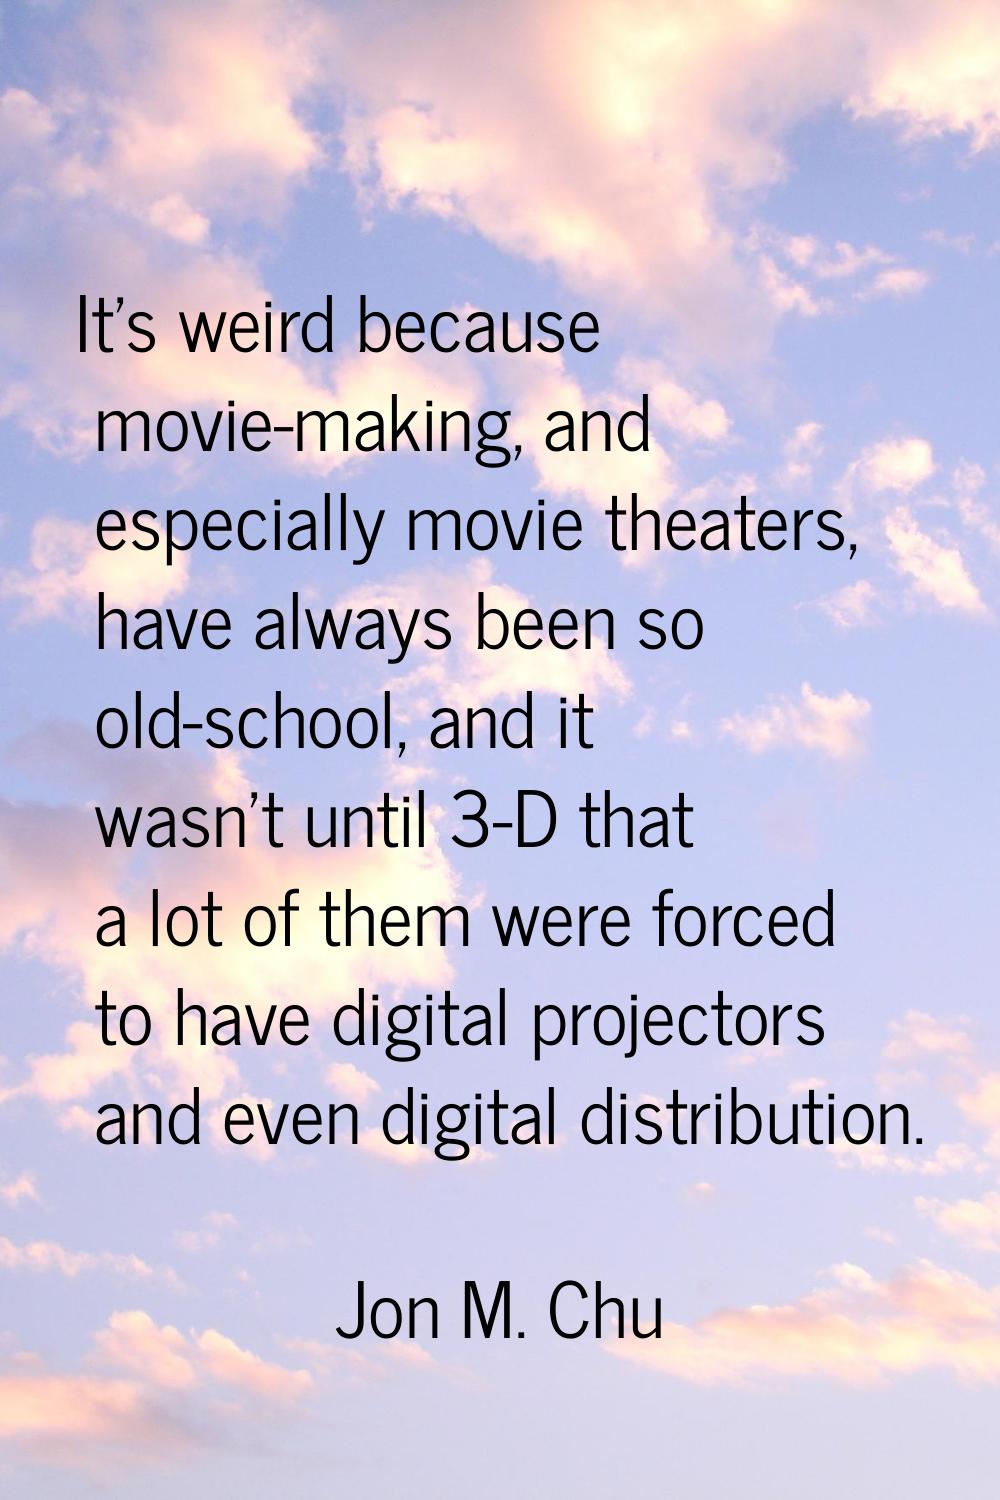 It's weird because movie-making, and especially movie theaters, have always been so old-school, and